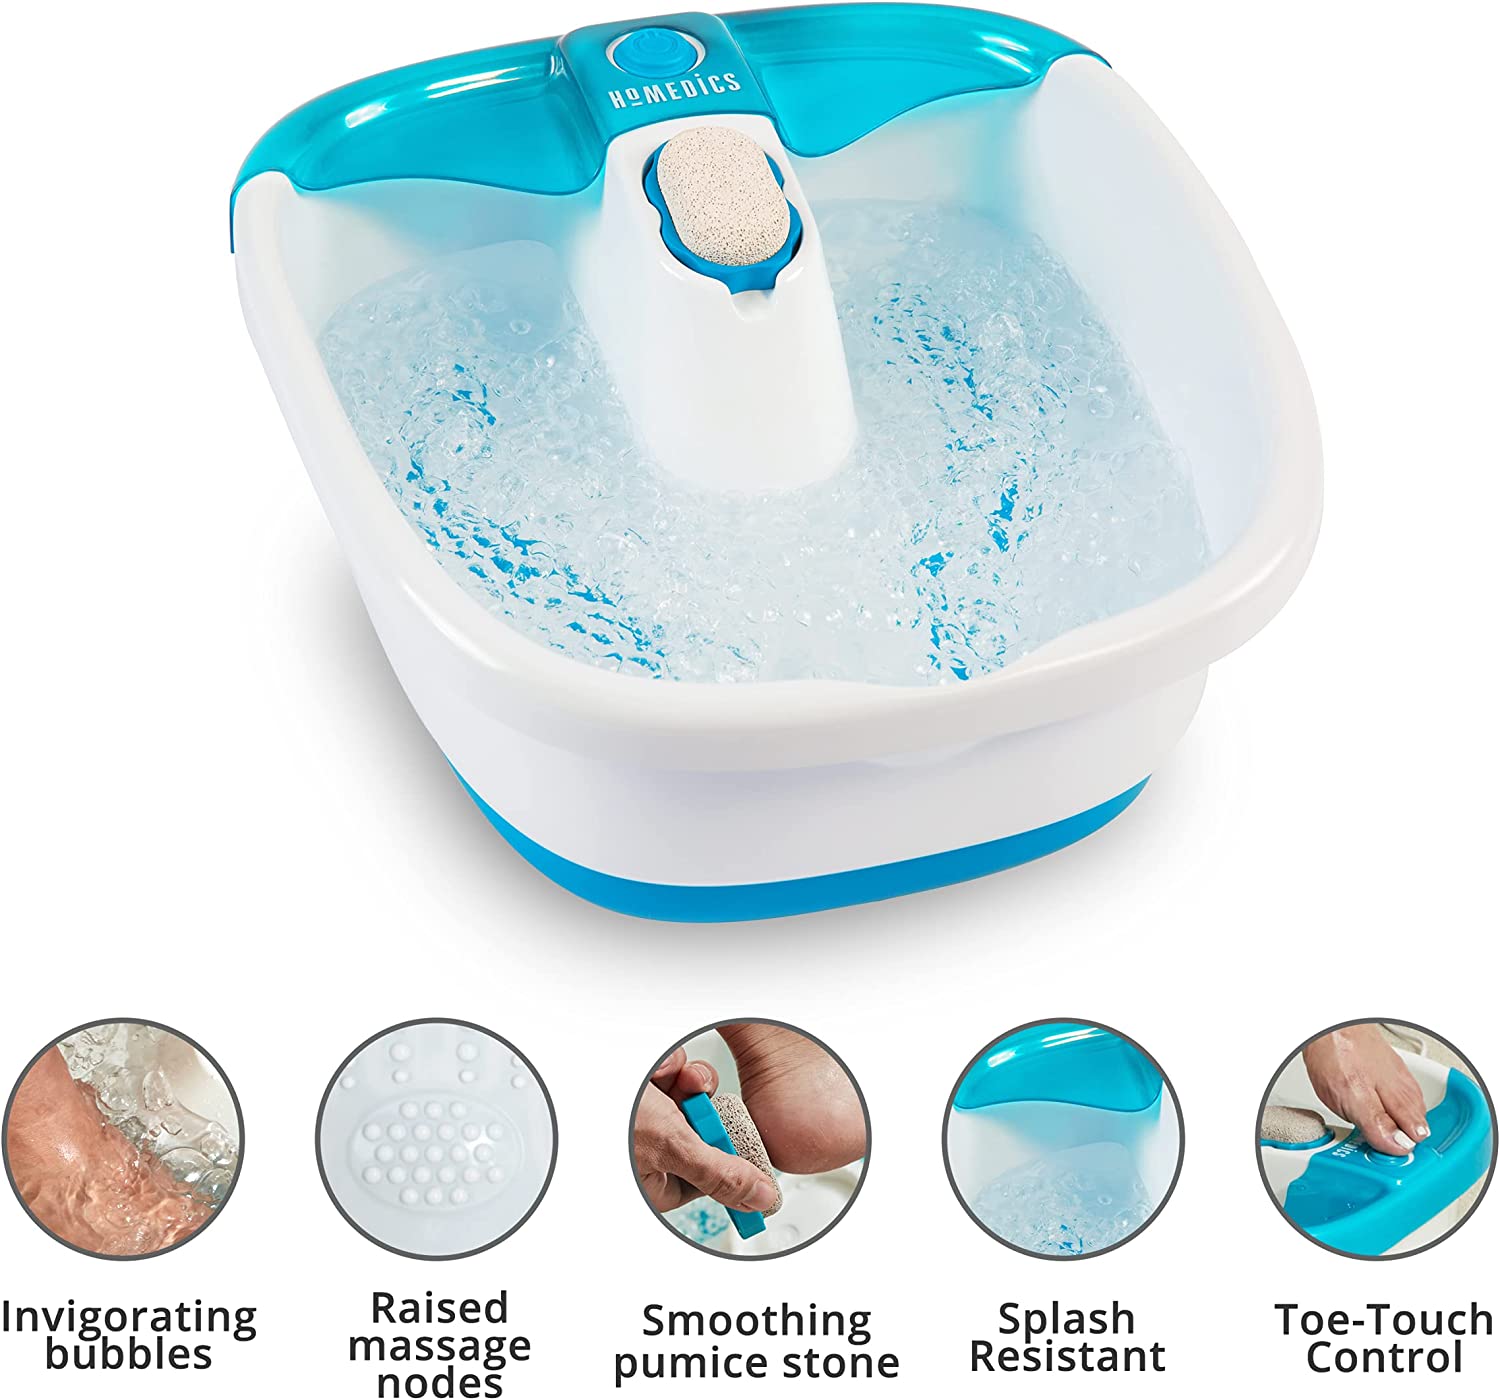 Homedics Bubble Mate Heated Foot Spa Bubble Foot Massager with Raised Massage nodes and Removable Pumice Stone - image 1 of 19